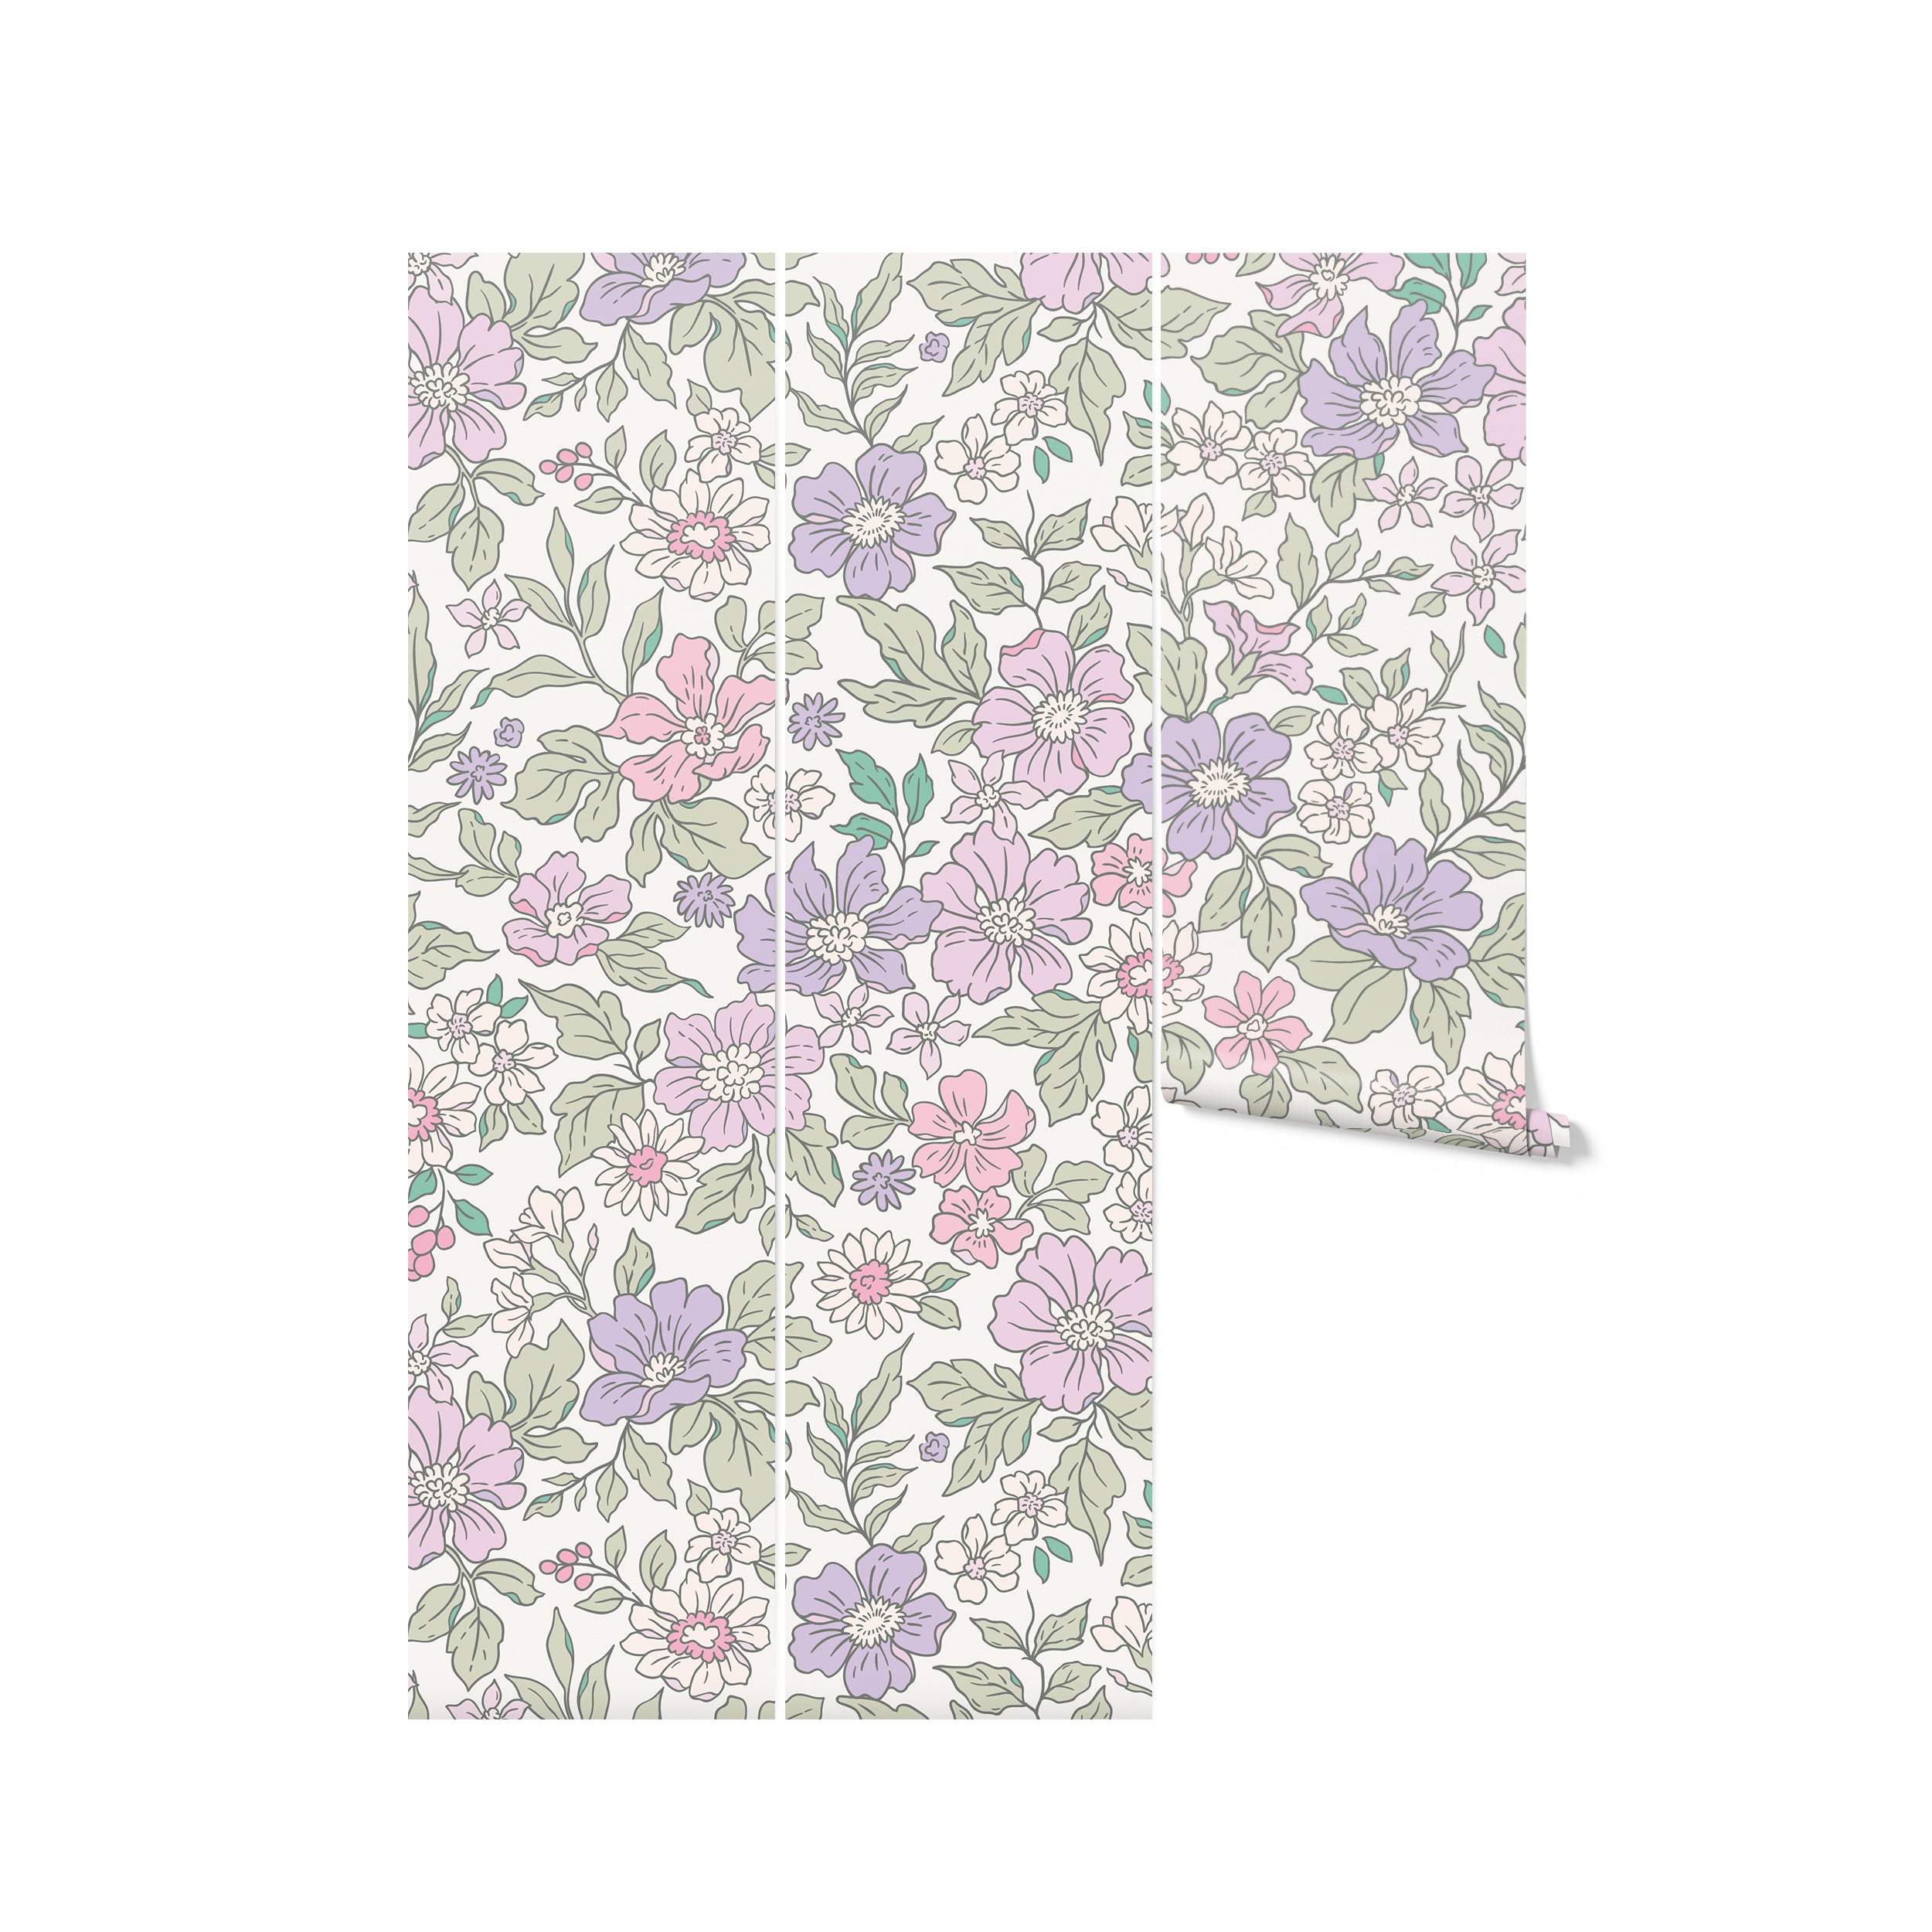 A roll of whimsical floral wallpaper showcasing a design of pastel-colored flowers in shades of pink, lavender, and green. The pattern creates a soft and charming aesthetic on a light background, perfect for adding a touch of playfulness to any room.